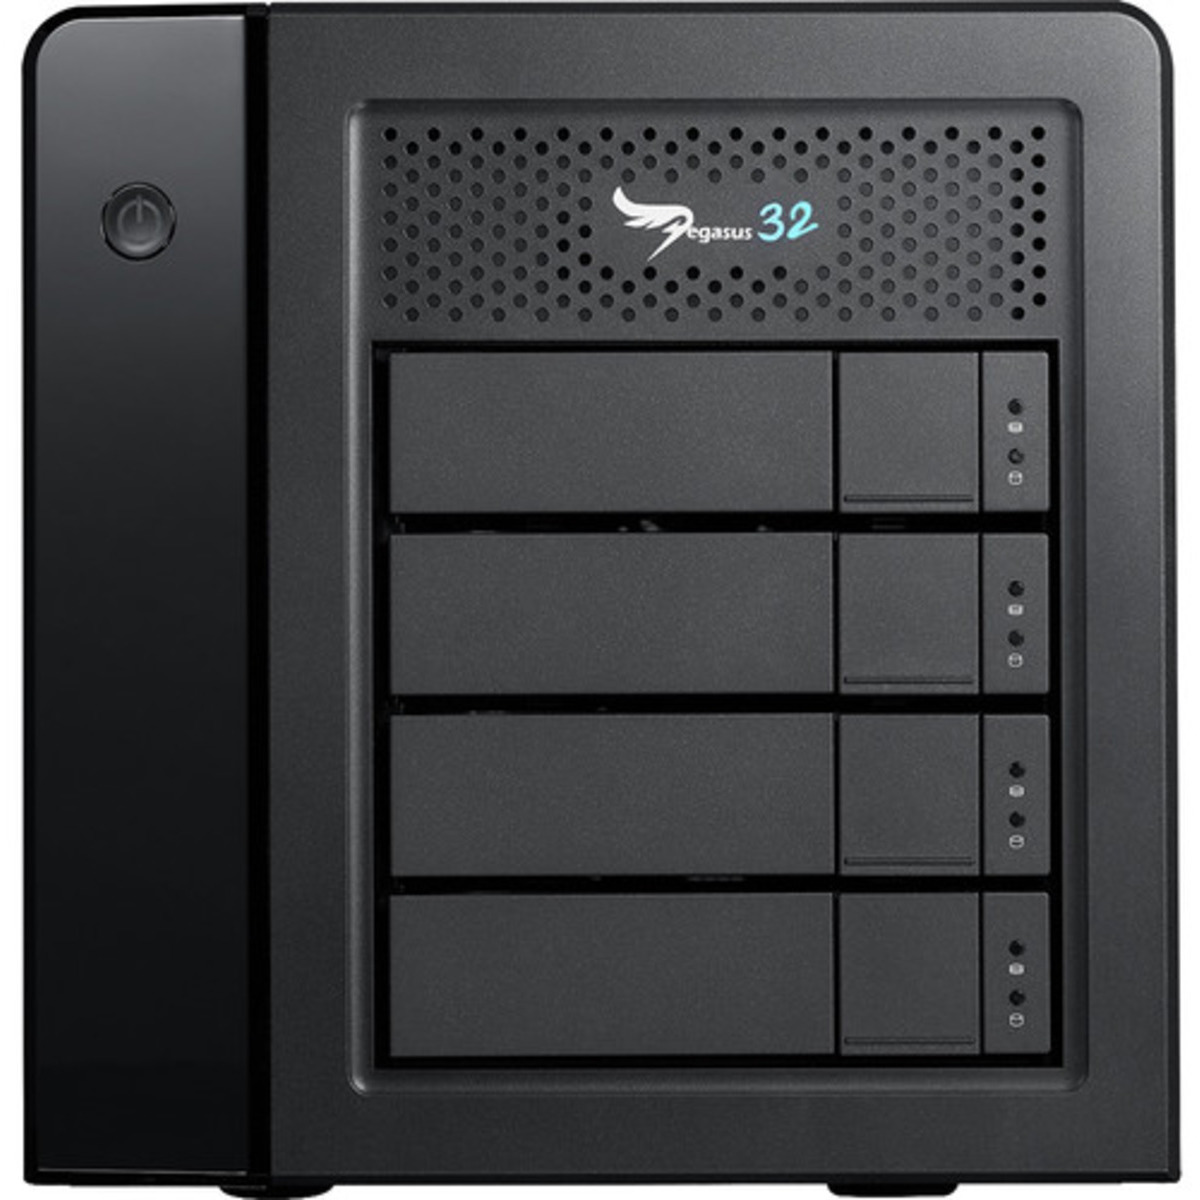 Promise Technology Pegasus32 R4 Thunderbolt 3 48tb 4-Bay Desktop Multimedia / Power User / Business DAS - Direct Attached Storage Device 3x16tb Seagate EXOS X18 ST16000NM000J 3.5 7200rpm SATA 6Gb/s HDD ENTERPRISE Class Drives Installed - Burn-In Tested Pegasus32 R4 Thunderbolt 3